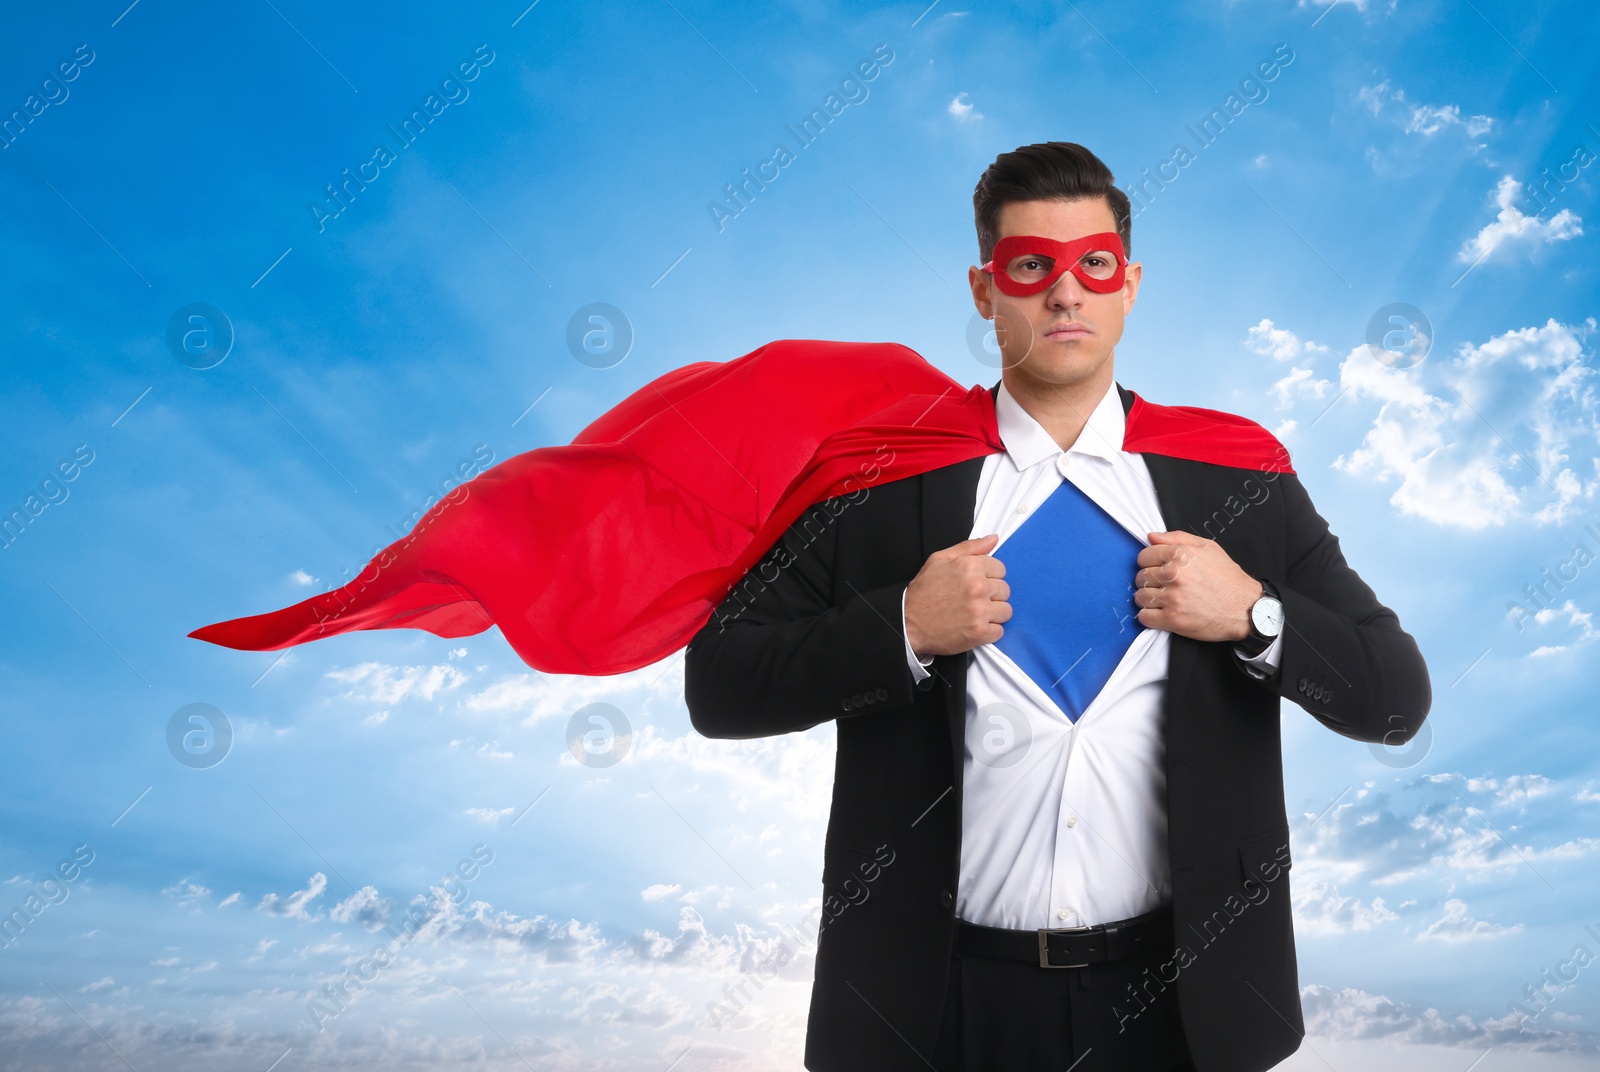 Image of Confident man wearing superhero cape and mask taking suit off against blue sky with clouds